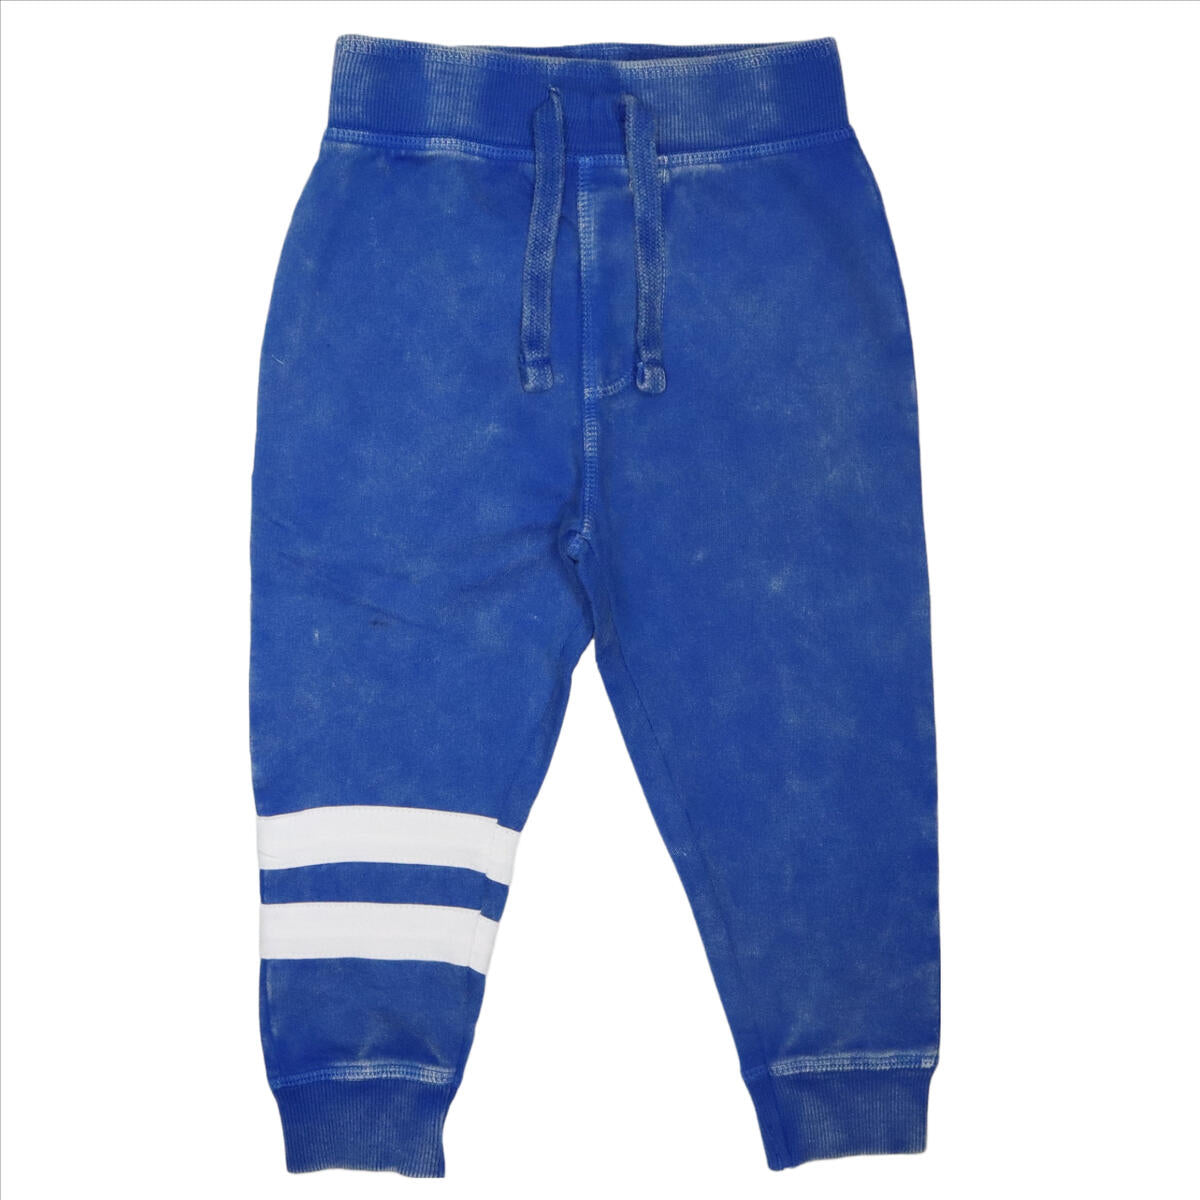 Cobalt Enzyme Jogger Pant - Twinkle Twinkle Little One